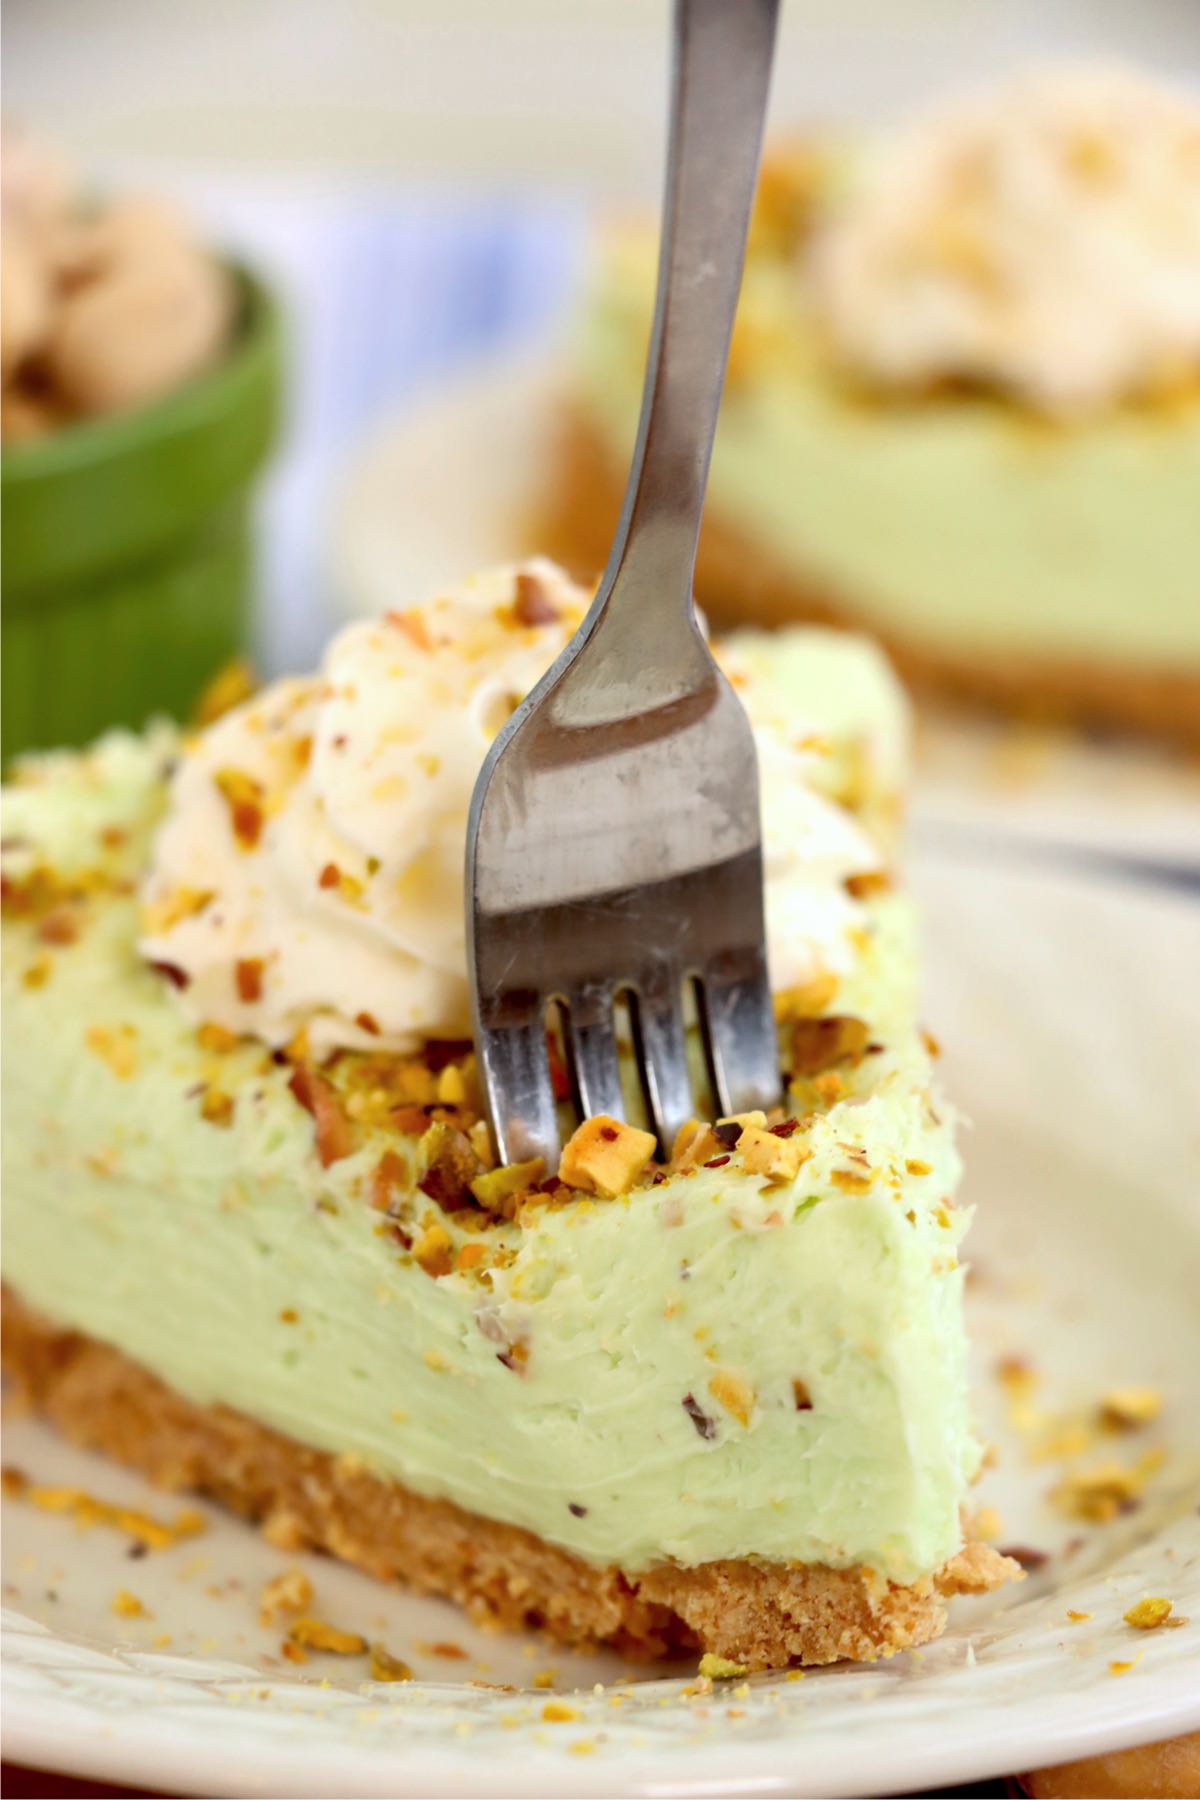 Fork digging into a piece of pistachio cheesecake